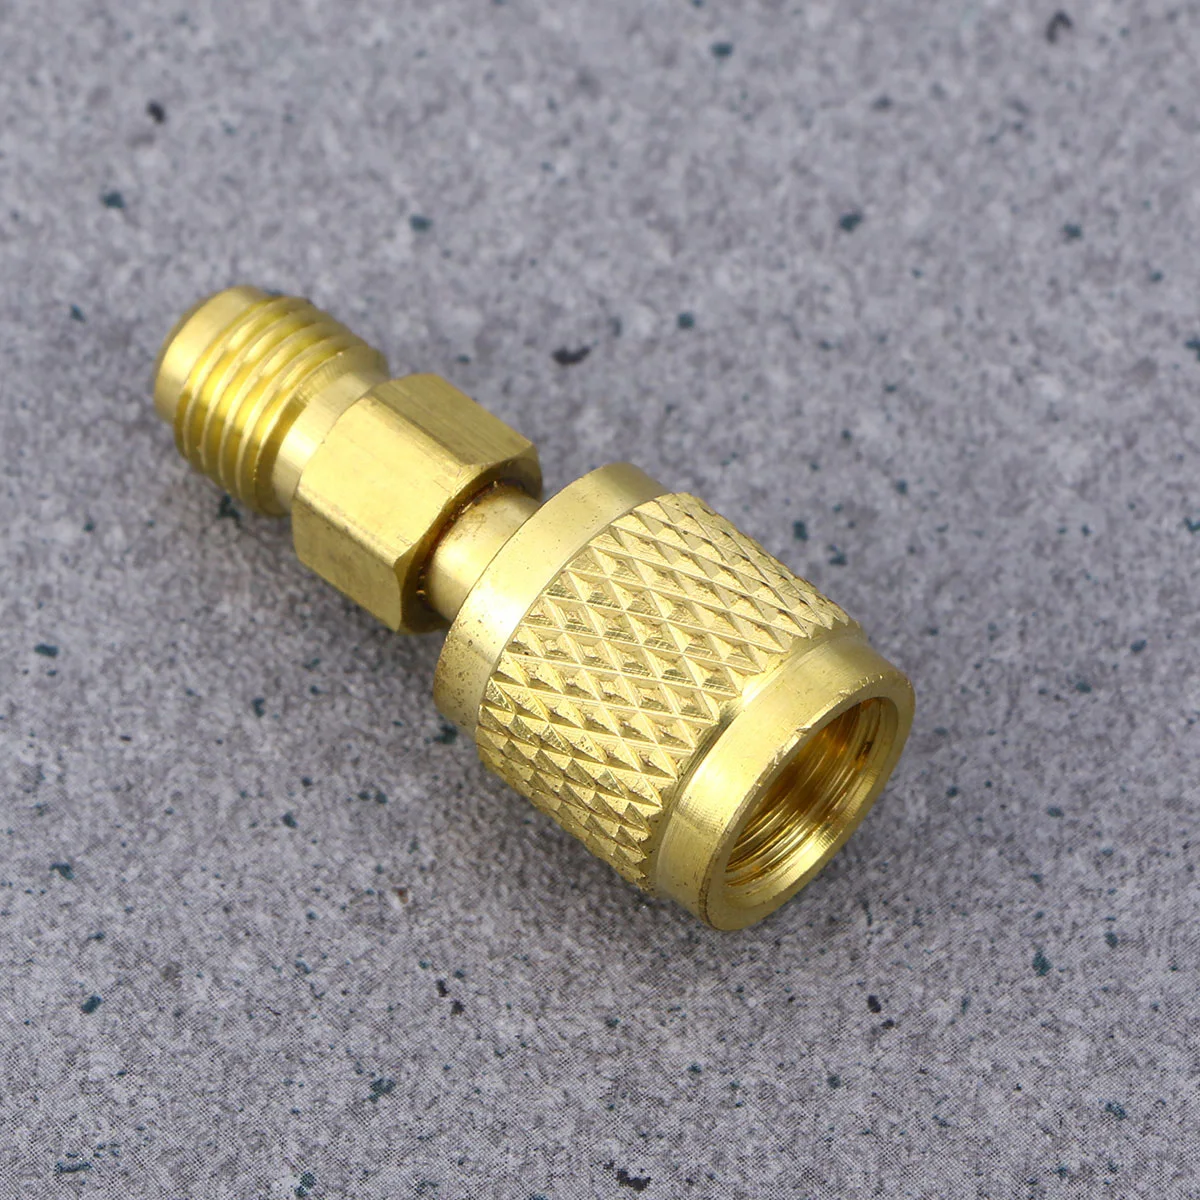 2pcs R410 Air Conditioner Refrigeration Converting Adapter Hose Set Kits Joint Quick Remover Installer Quick Connector Golden A3 images - 6